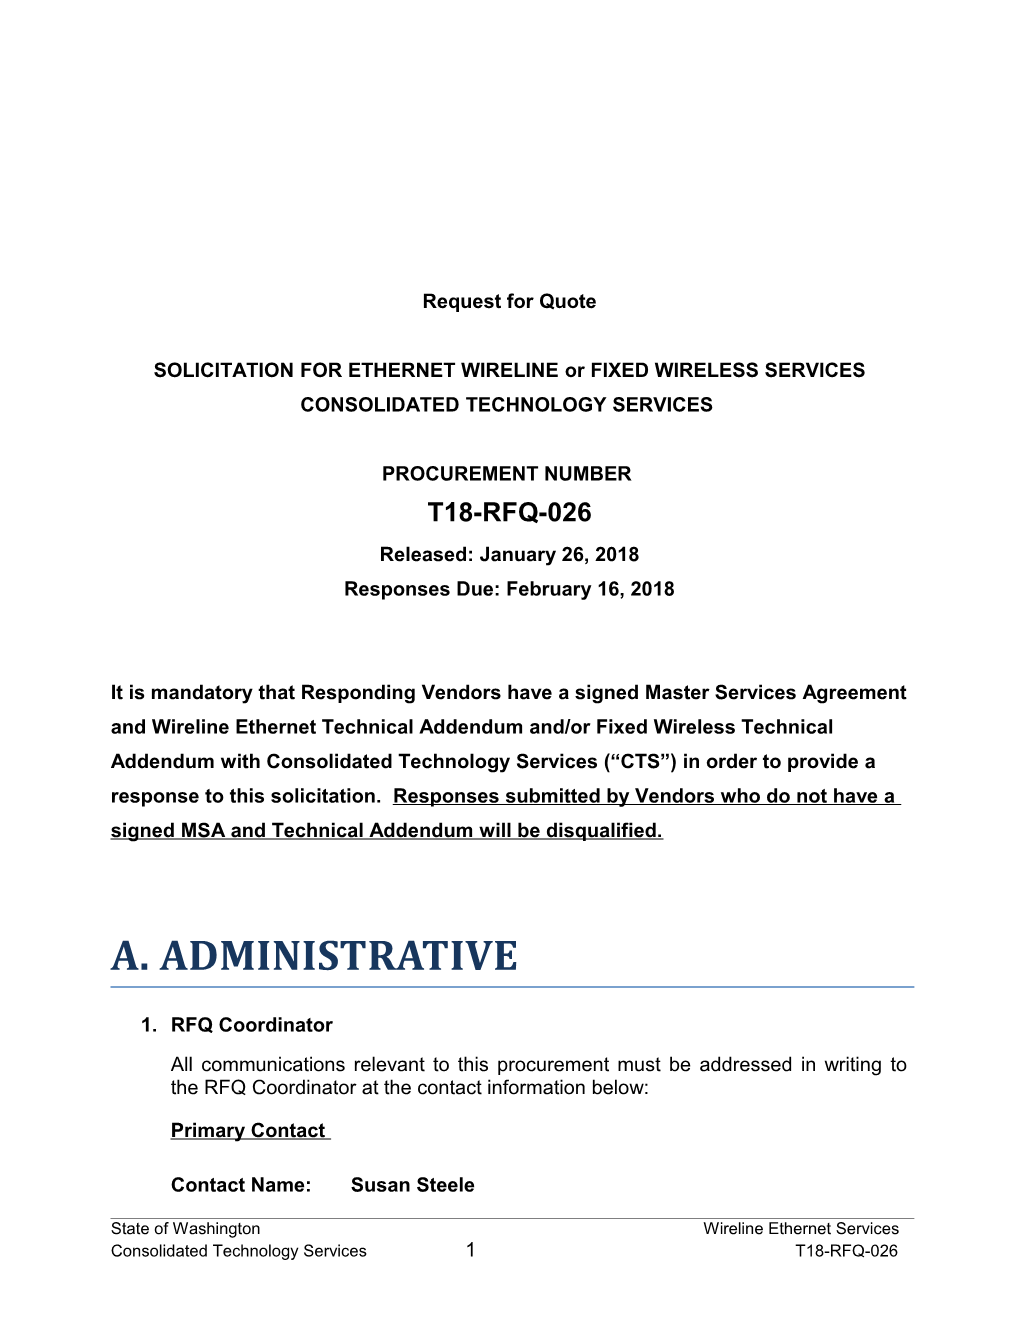 SOLICITATION for ETHERNET Wirelineor FIXED WIRELESS SERVICES